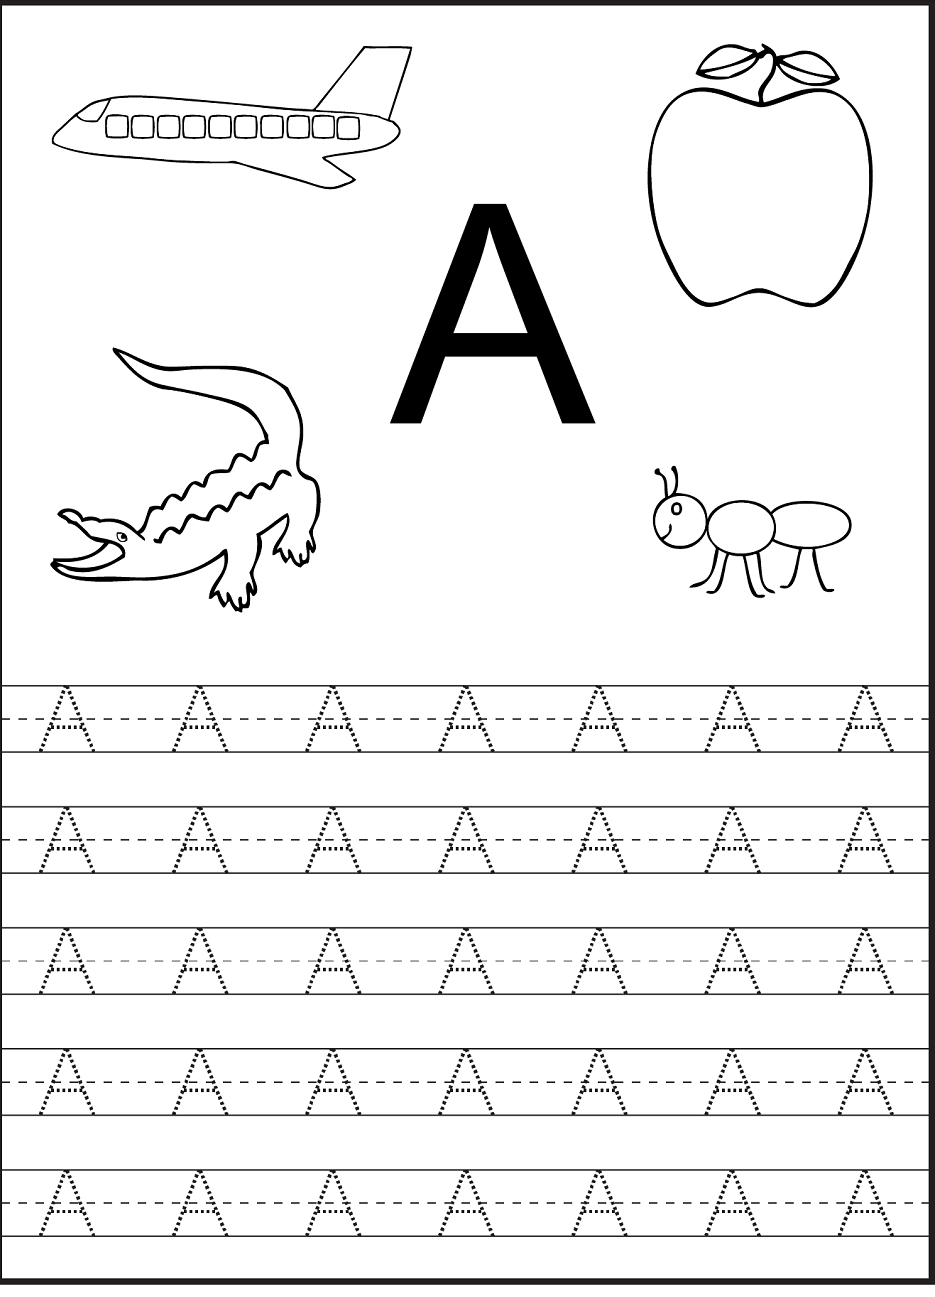 Tracing The Letter A Free Printable | Alphabet And Numbers Learning - Free Printable Activities For Preschoolers